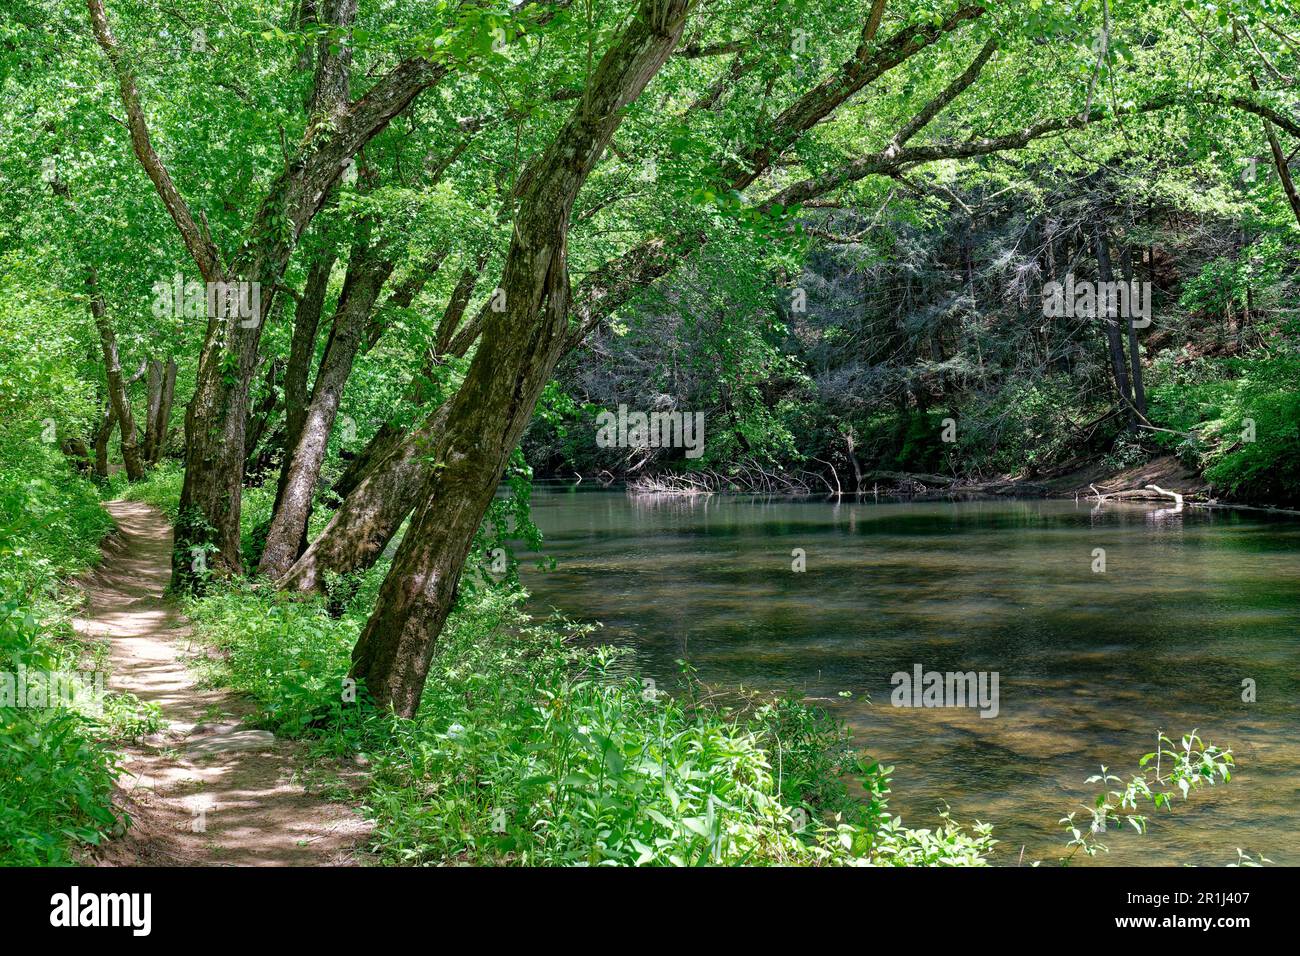 Rustic trail along the calm flowing river surrounded by thick green vegetation and trees in a forest on a sunny day in springtime Stock Photo